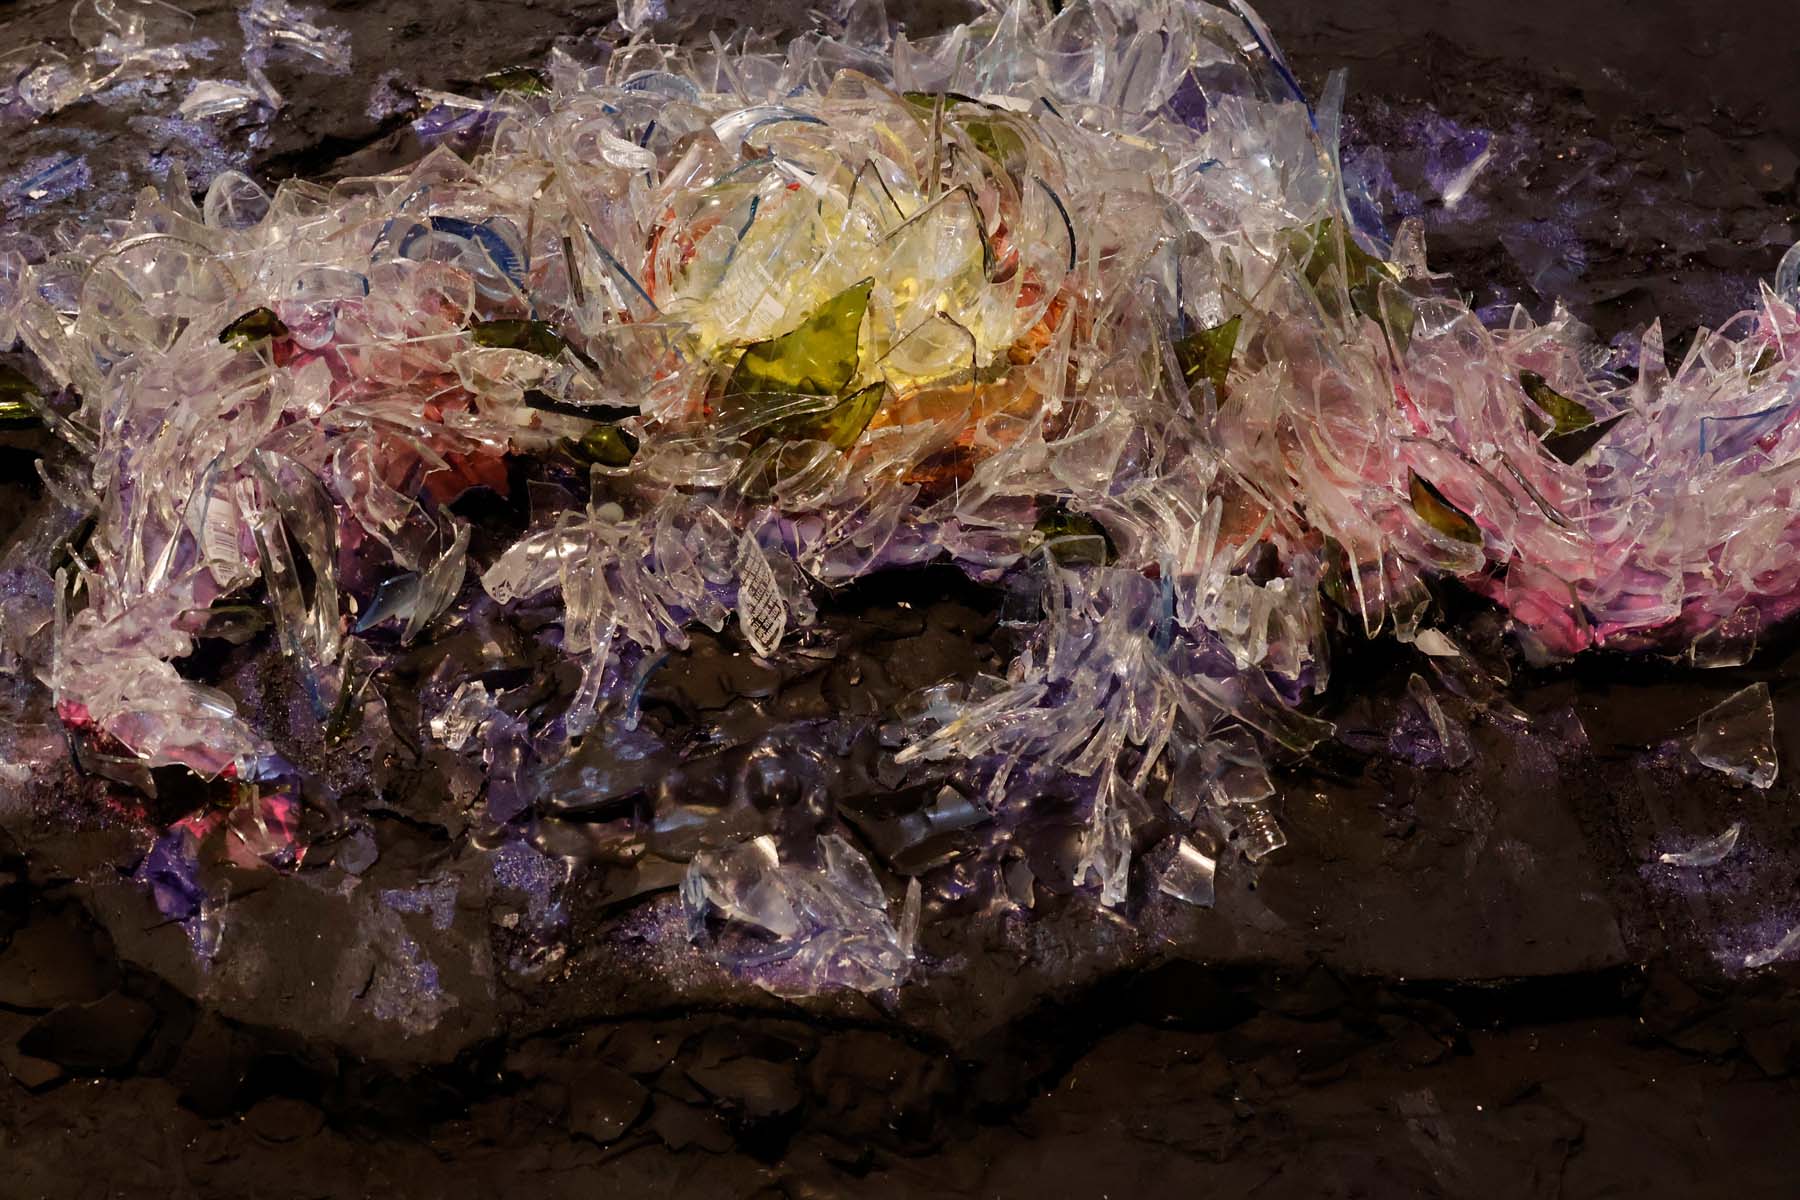 Close up of the glass layers of the sculpture. From here, printed text from some bottles is visible, as are the color differences in green and blue shards among the predominantly clear ones, and the yellows and reds from the galaxy center reflect throughout.